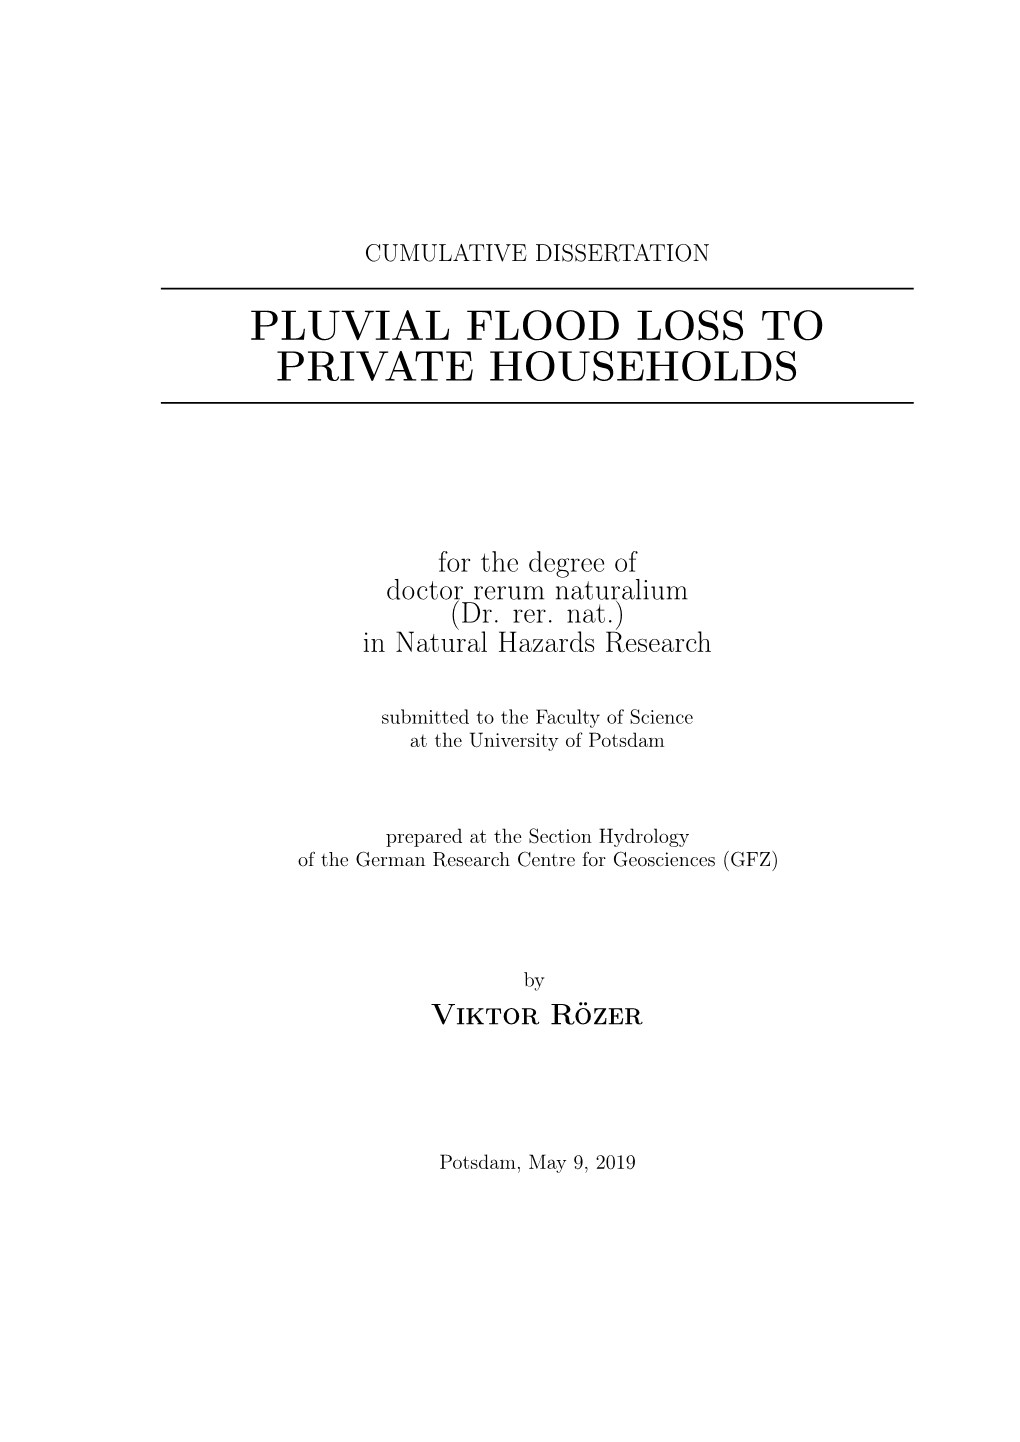 Pluvial Flood Loss to Private Households